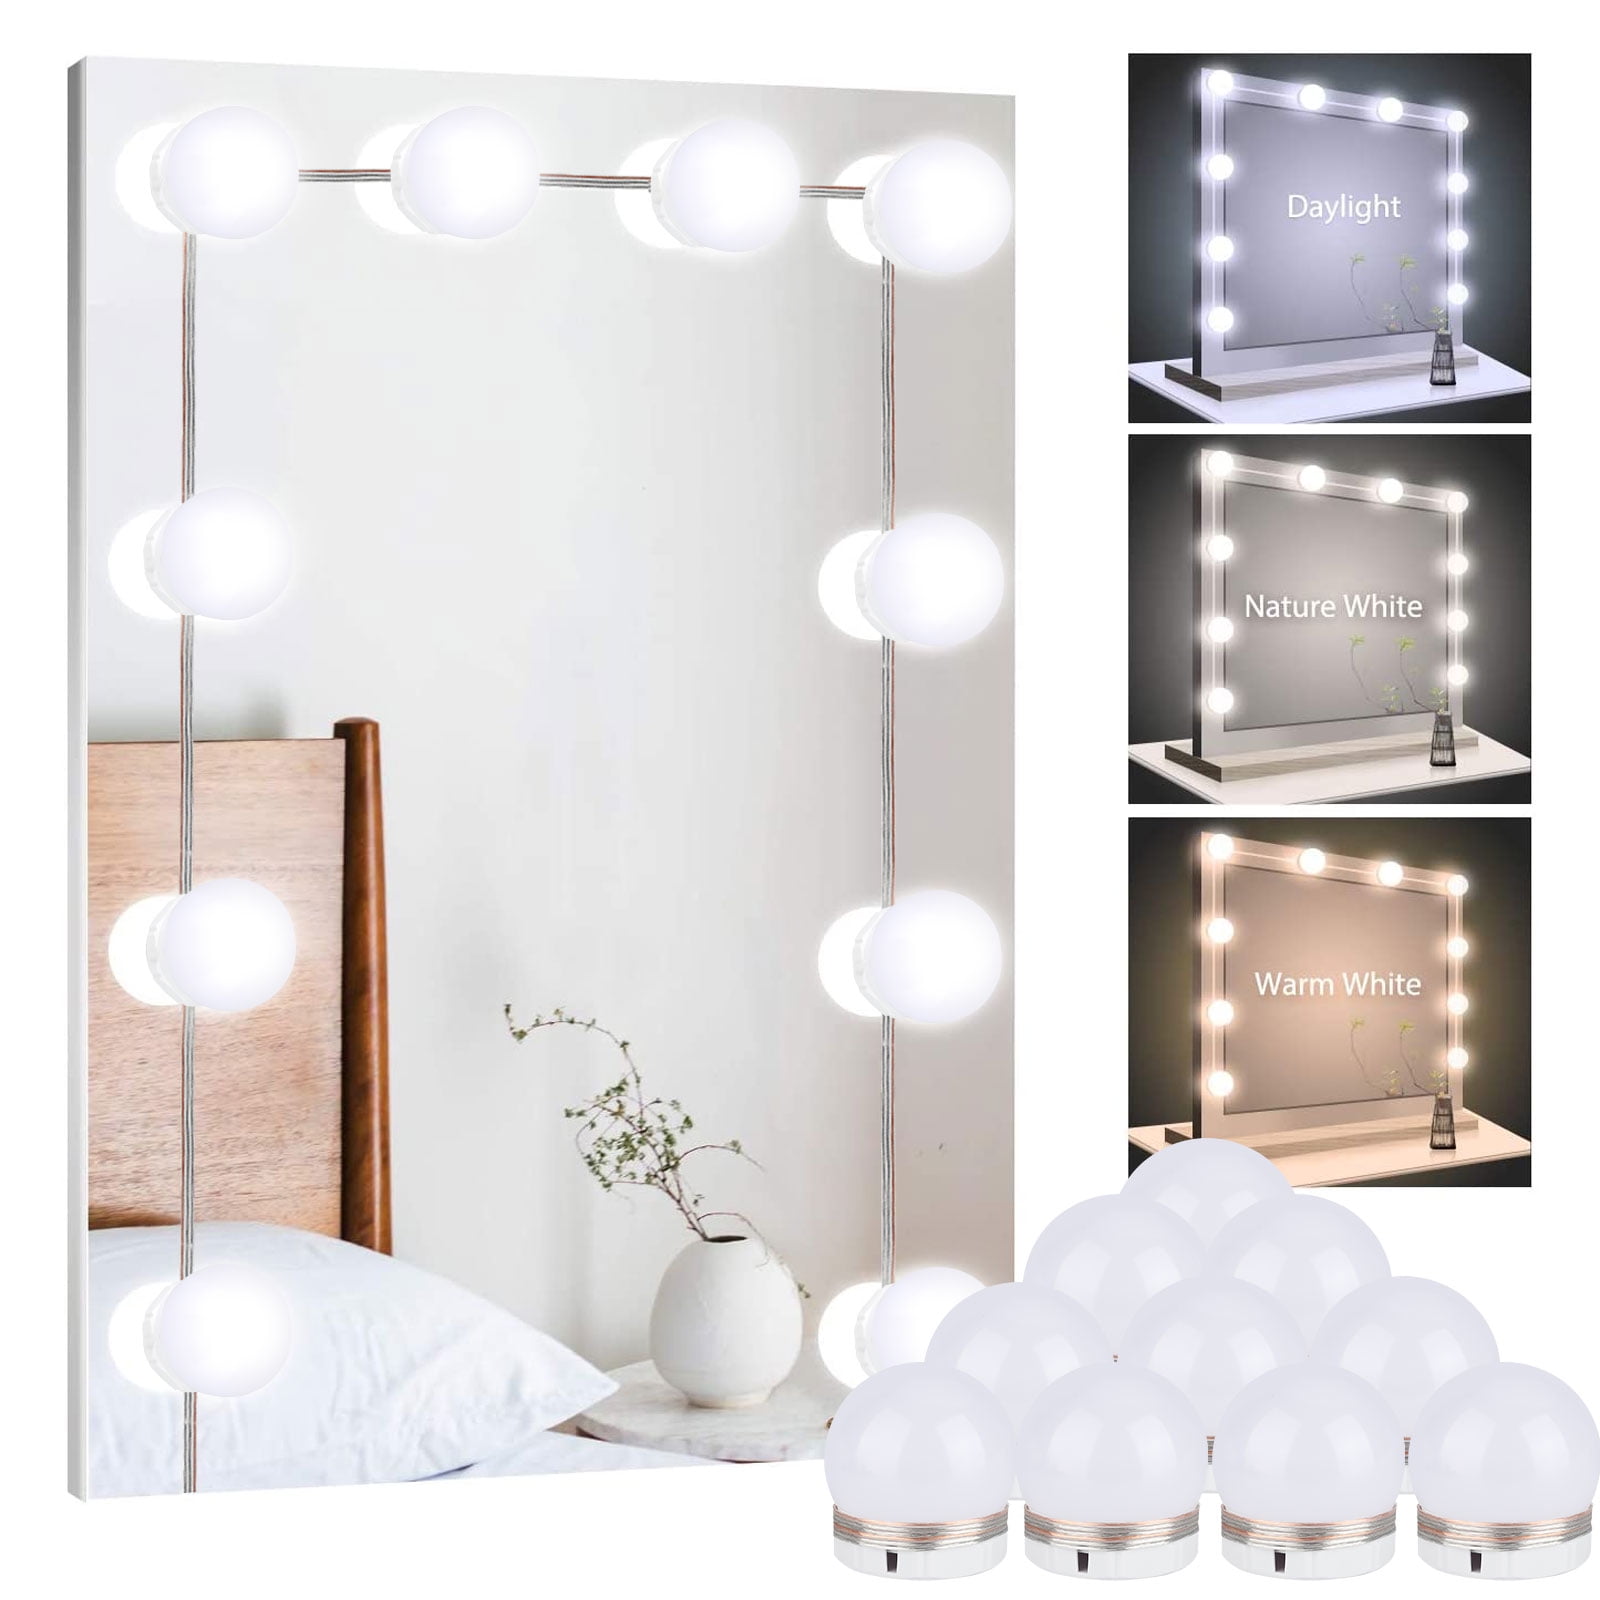 Stick on LED Mirror Light Kit for Makeup Vanity Hollywood Mirror Lights for Dressing Table or Vanity Set Hollywood Style LED Vanity Mirror Lights Kit with Dimmable Light Bulbs 14 LED Bulbs